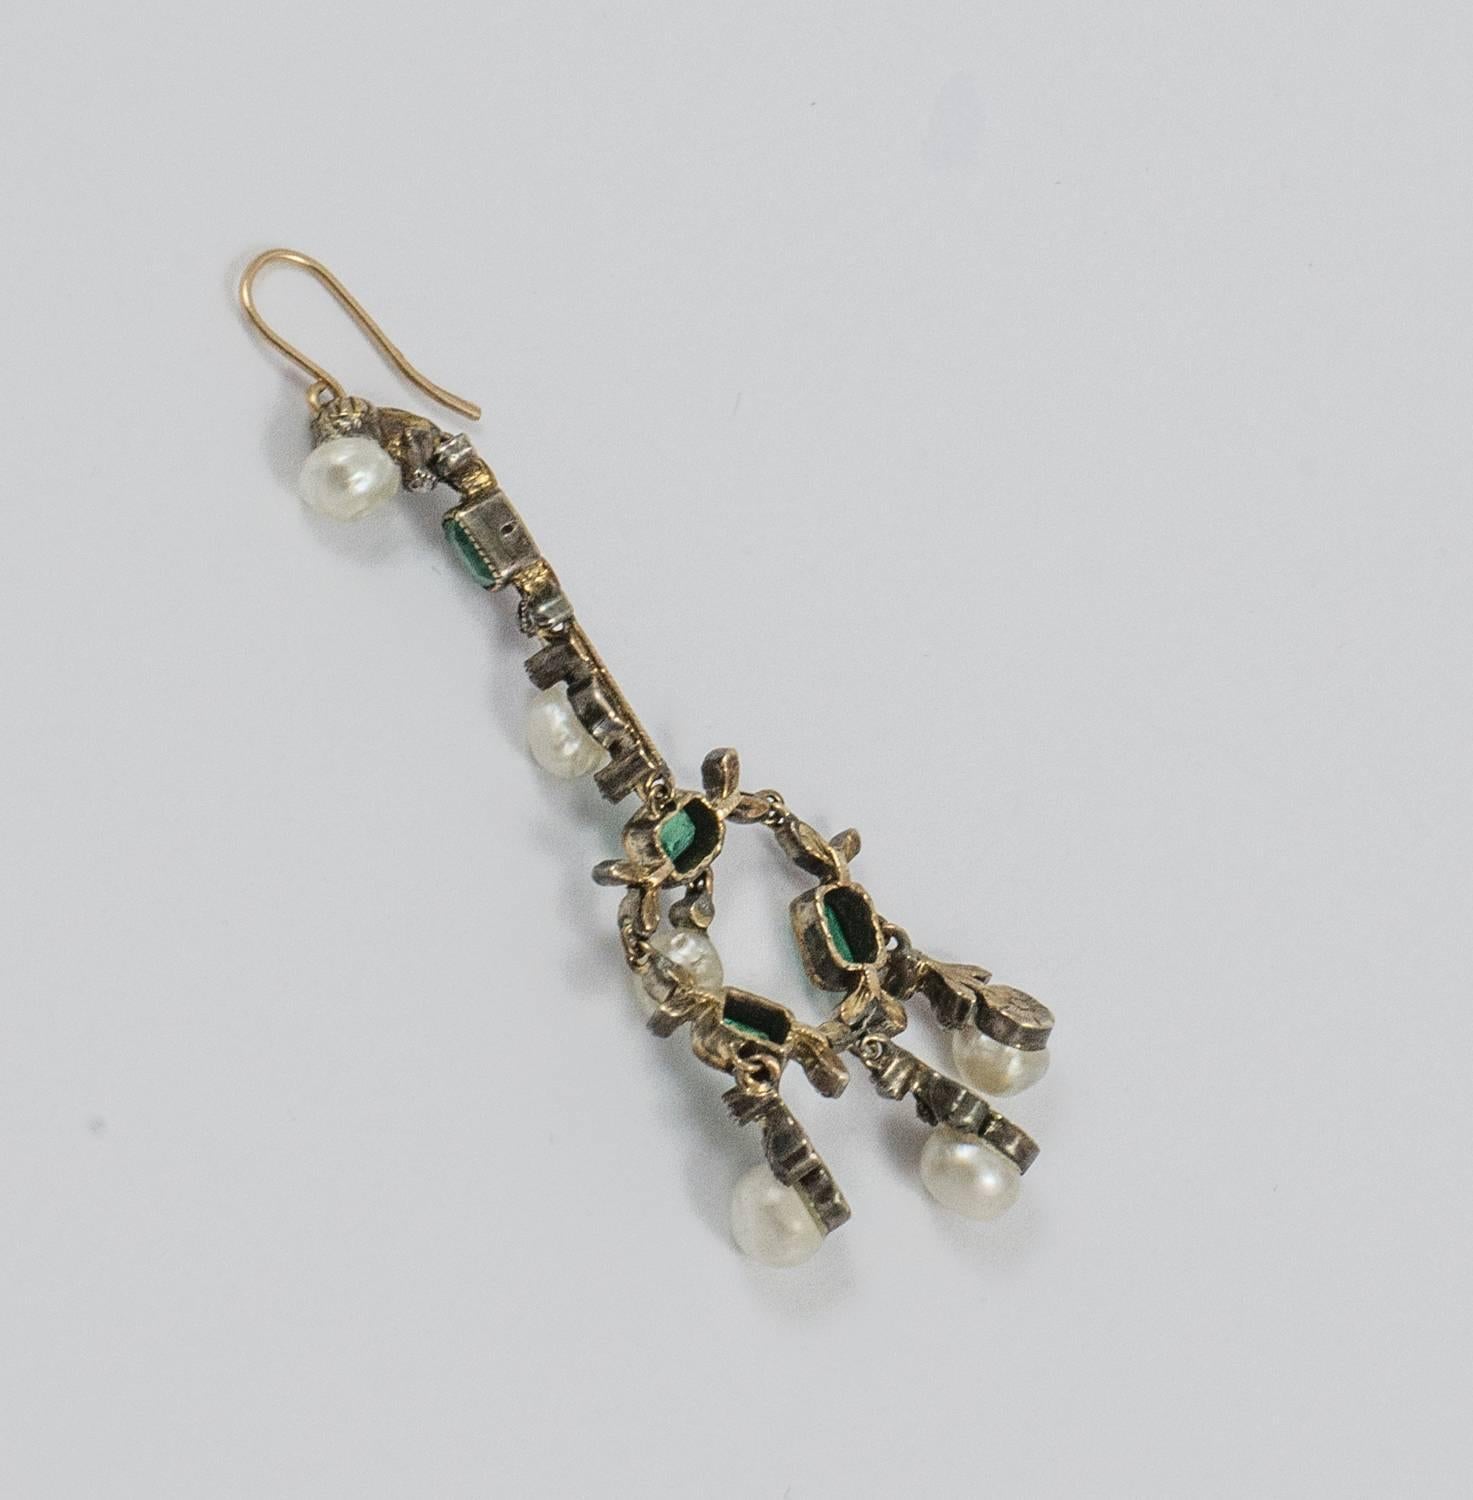 A pair of antique earrings set in 14k yellow gold with detailed design comprised of Emeralds, Pearls and Diamond chips. They are hand made with fine, delicate workmanship. The emeralds are bezel set in mill grain mounts and the tiny diamond chips